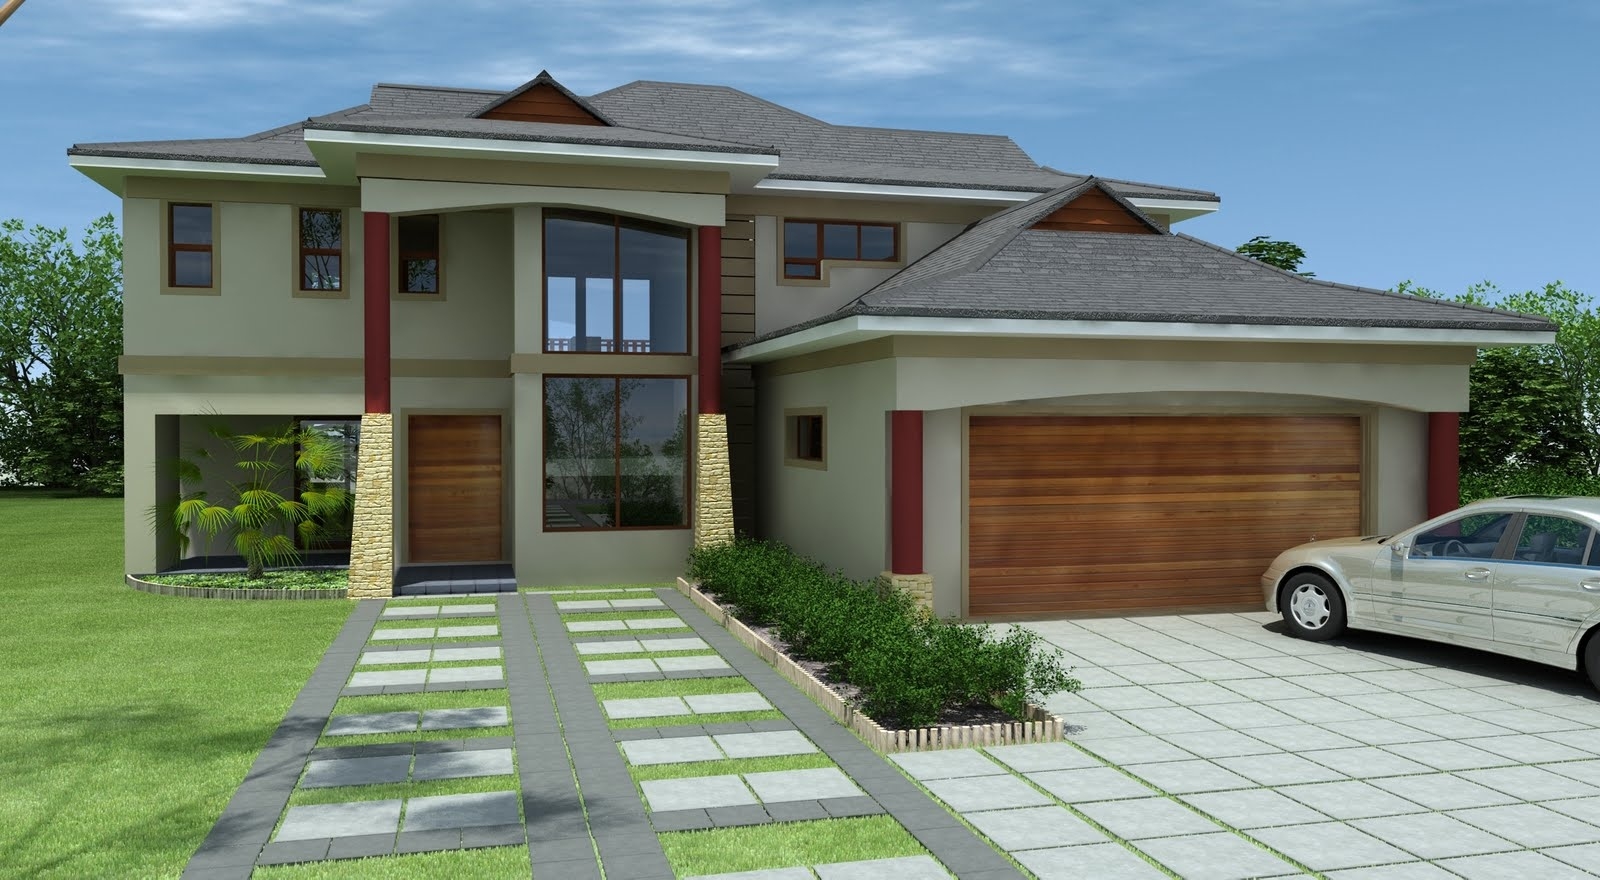 Splendid house plans pretoria with free south african house plans with photos